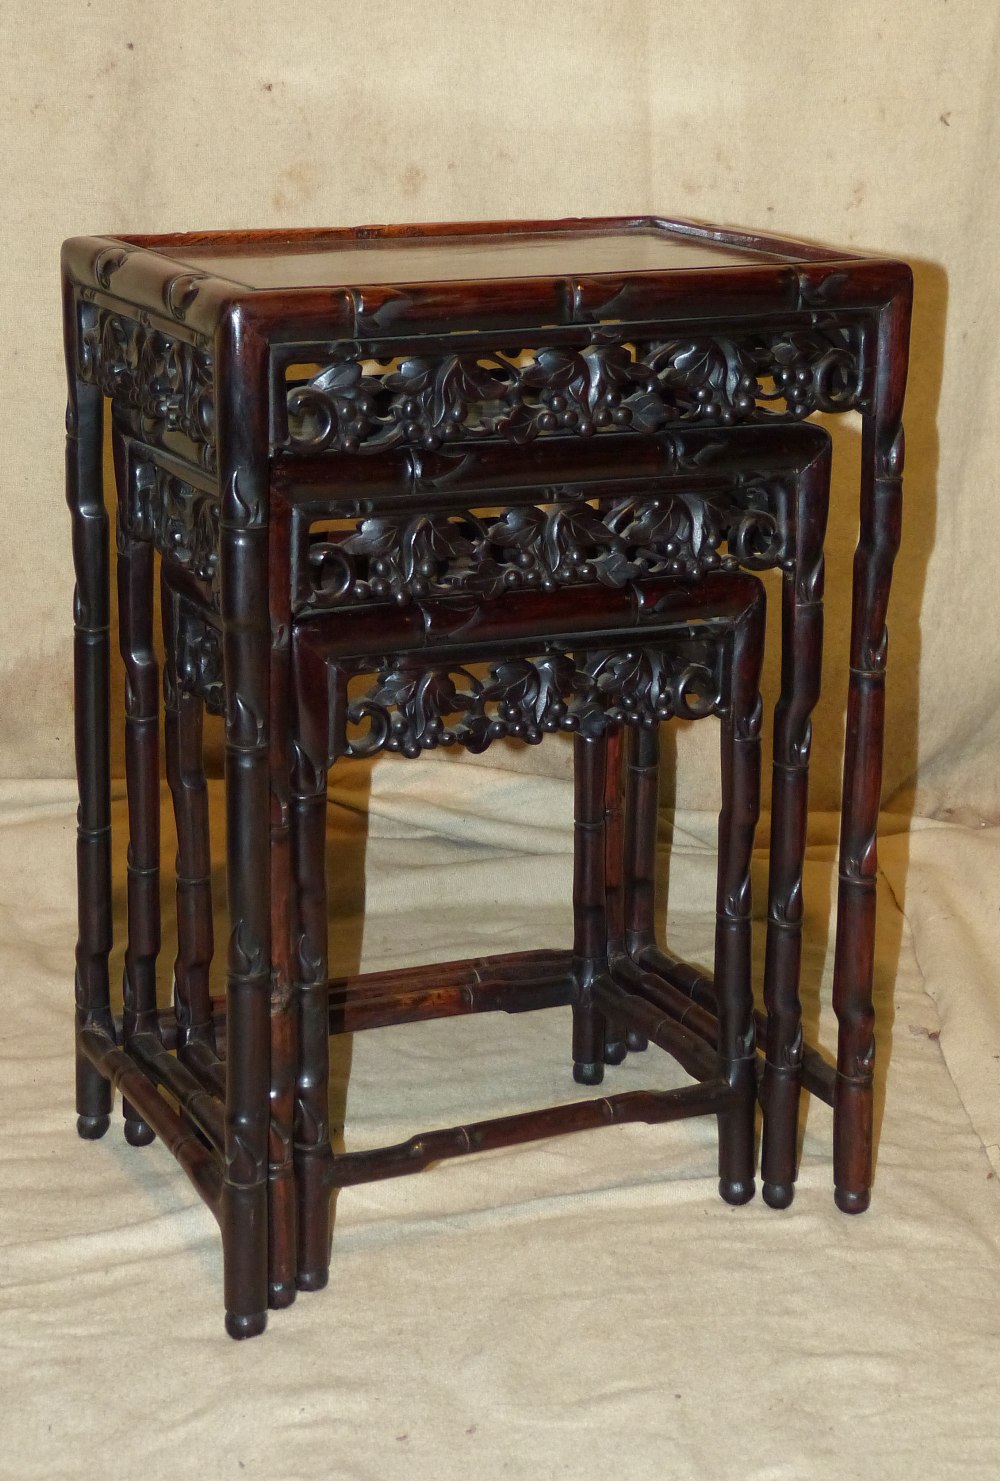 A Nest of 3 Oriental Rectangular Shaped Coffee Tables having carved fruit, leaf and bamboo